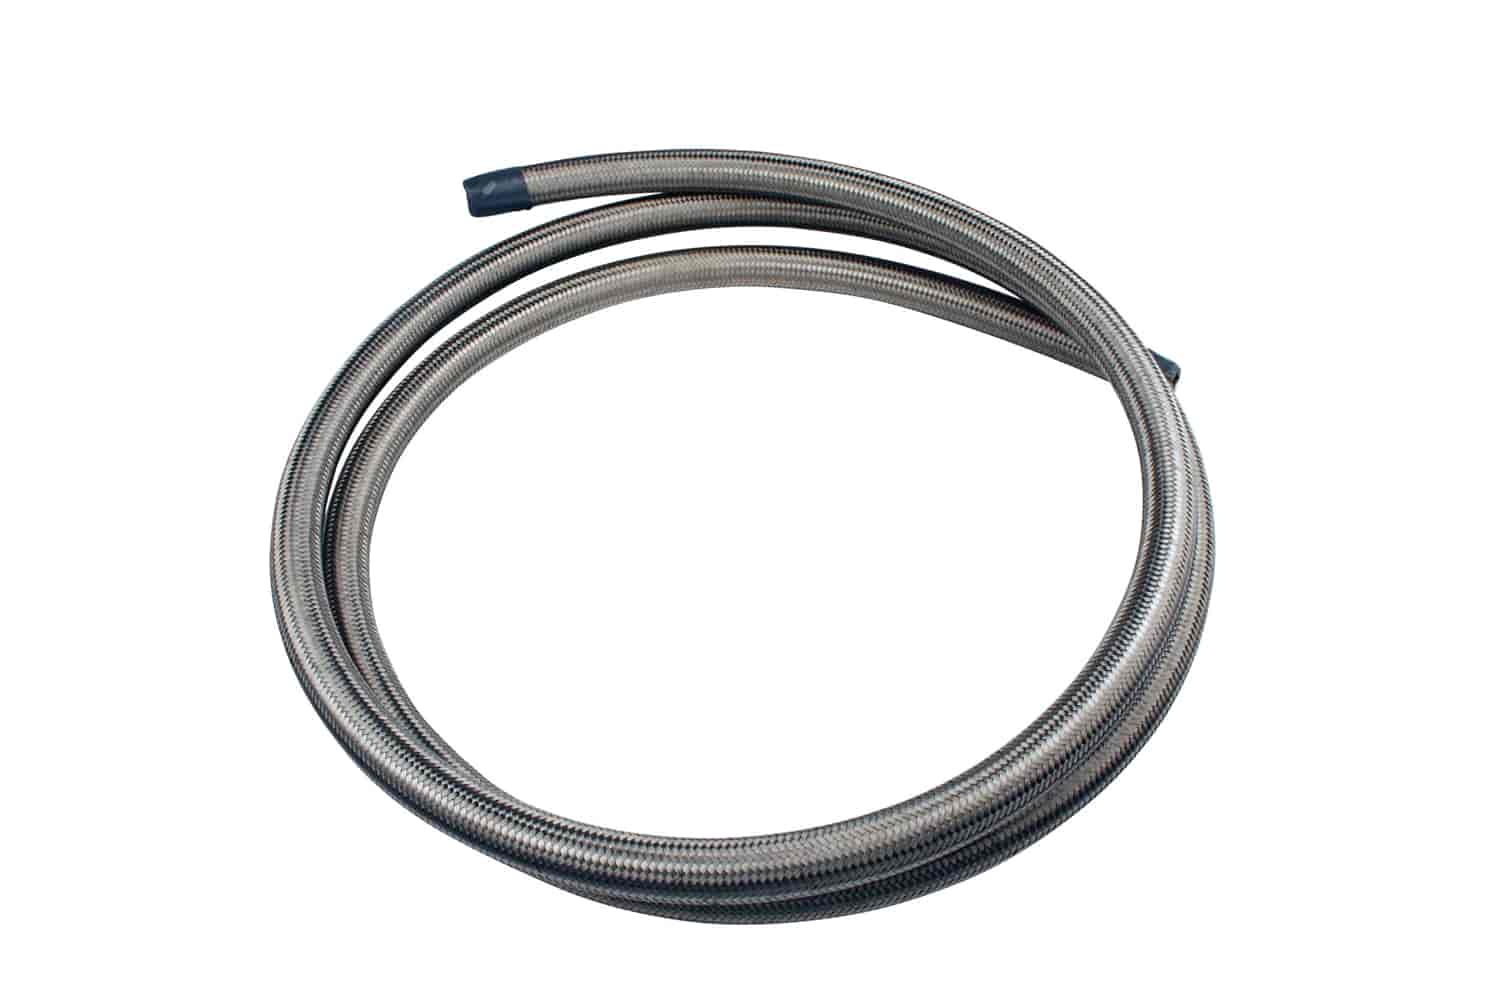 Braided Stainless Steel Fuel Hose -10AN x 8 ft